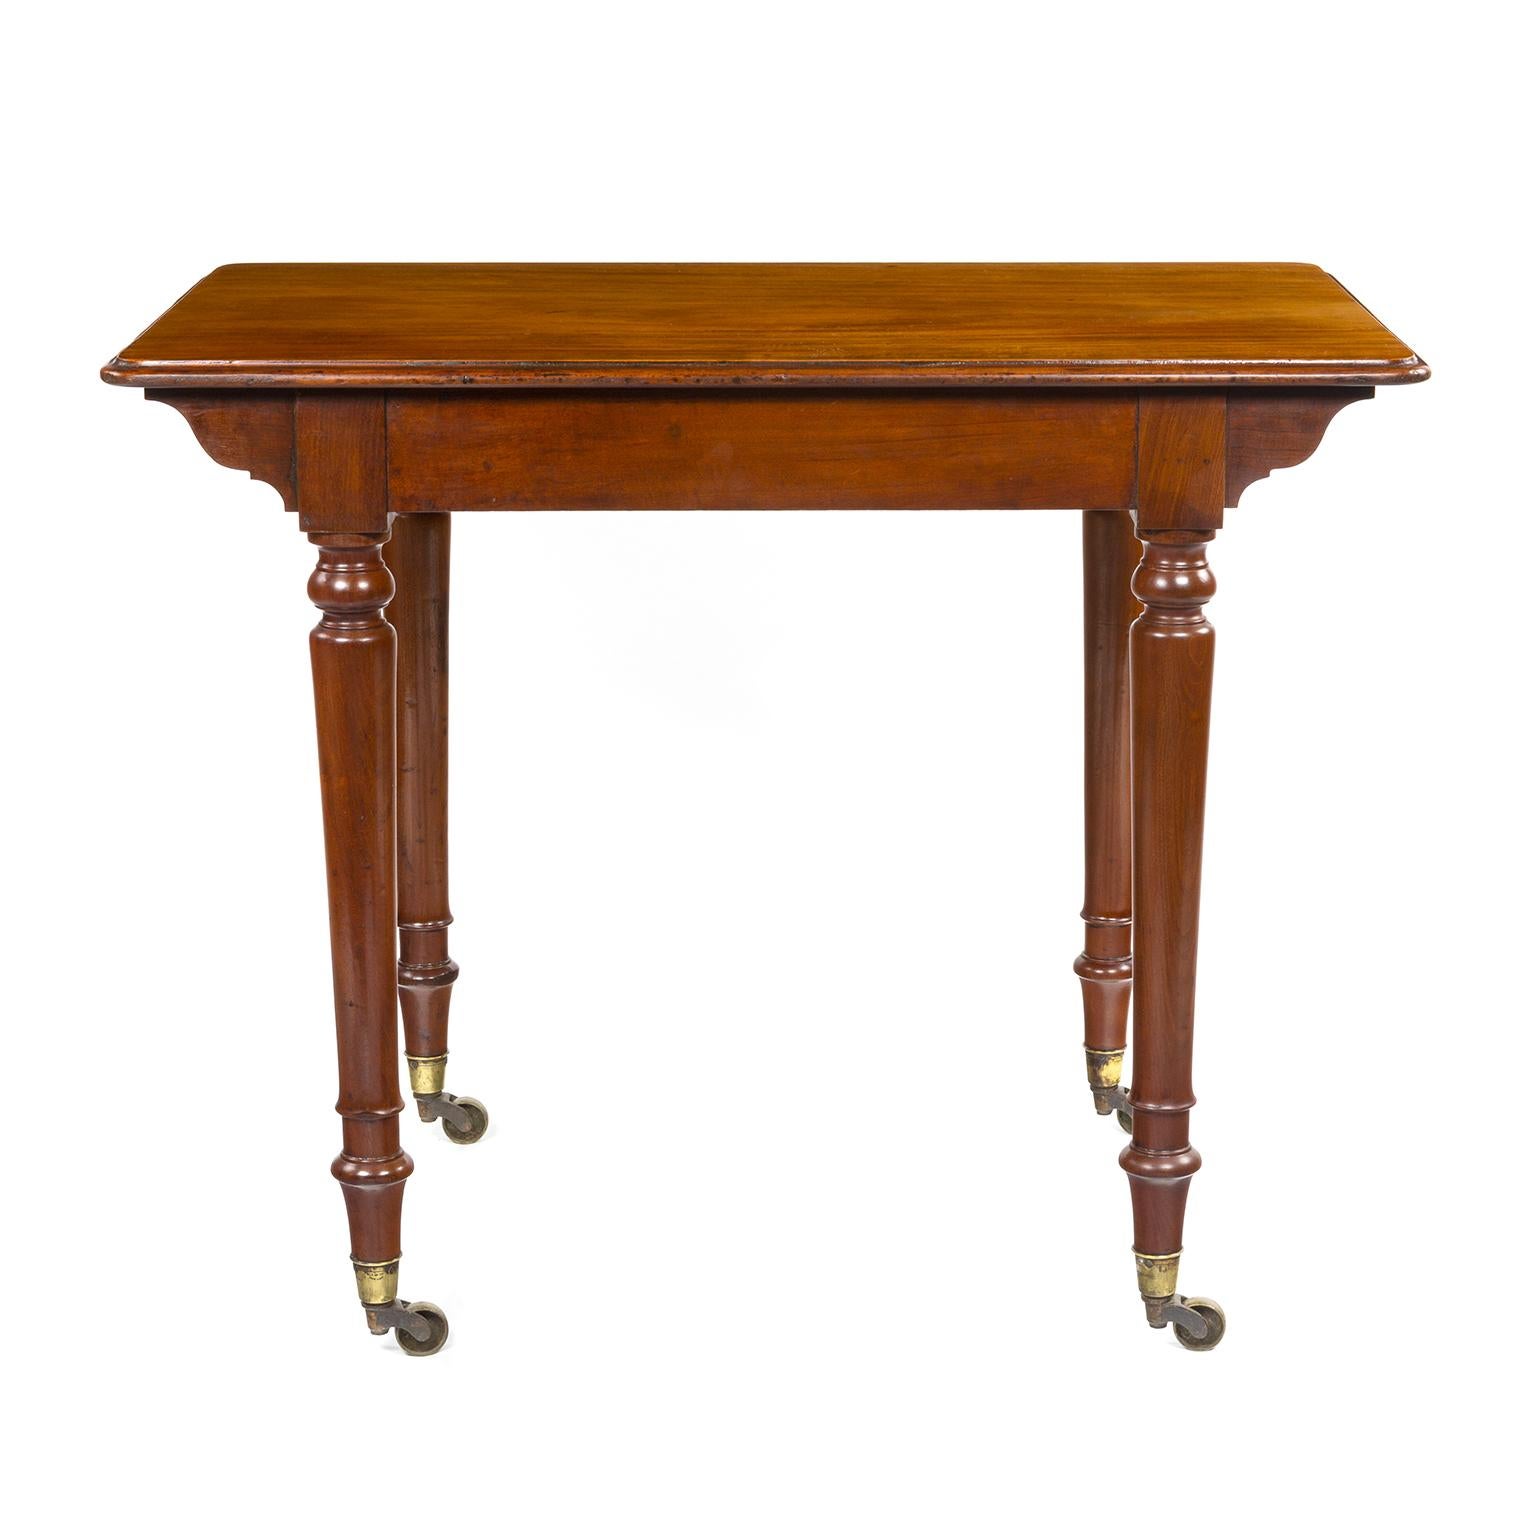 A Regency mahogany side or writing table by Holland & Son, a single draw with original wooden knobs.

The firm of Holland & Sons (1803–1942) became from 1843 one of the largest and most successful cabinet makers, and a rival to Gillows of